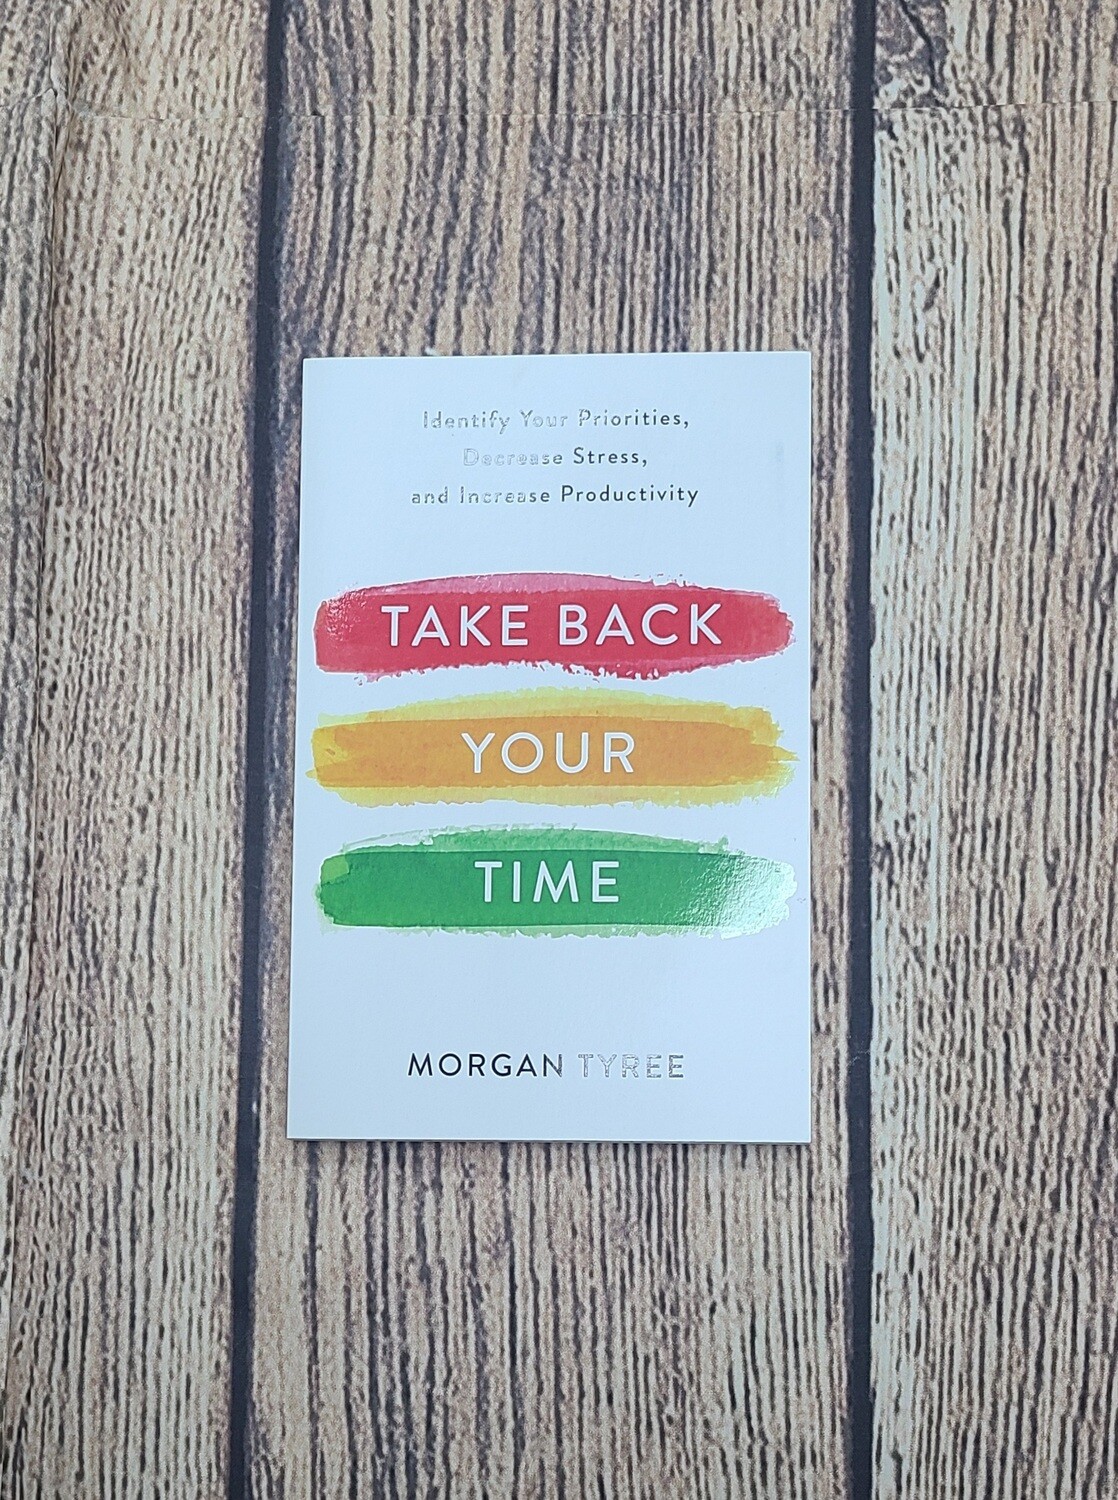 Take Back Your Time by Morgan Tyree